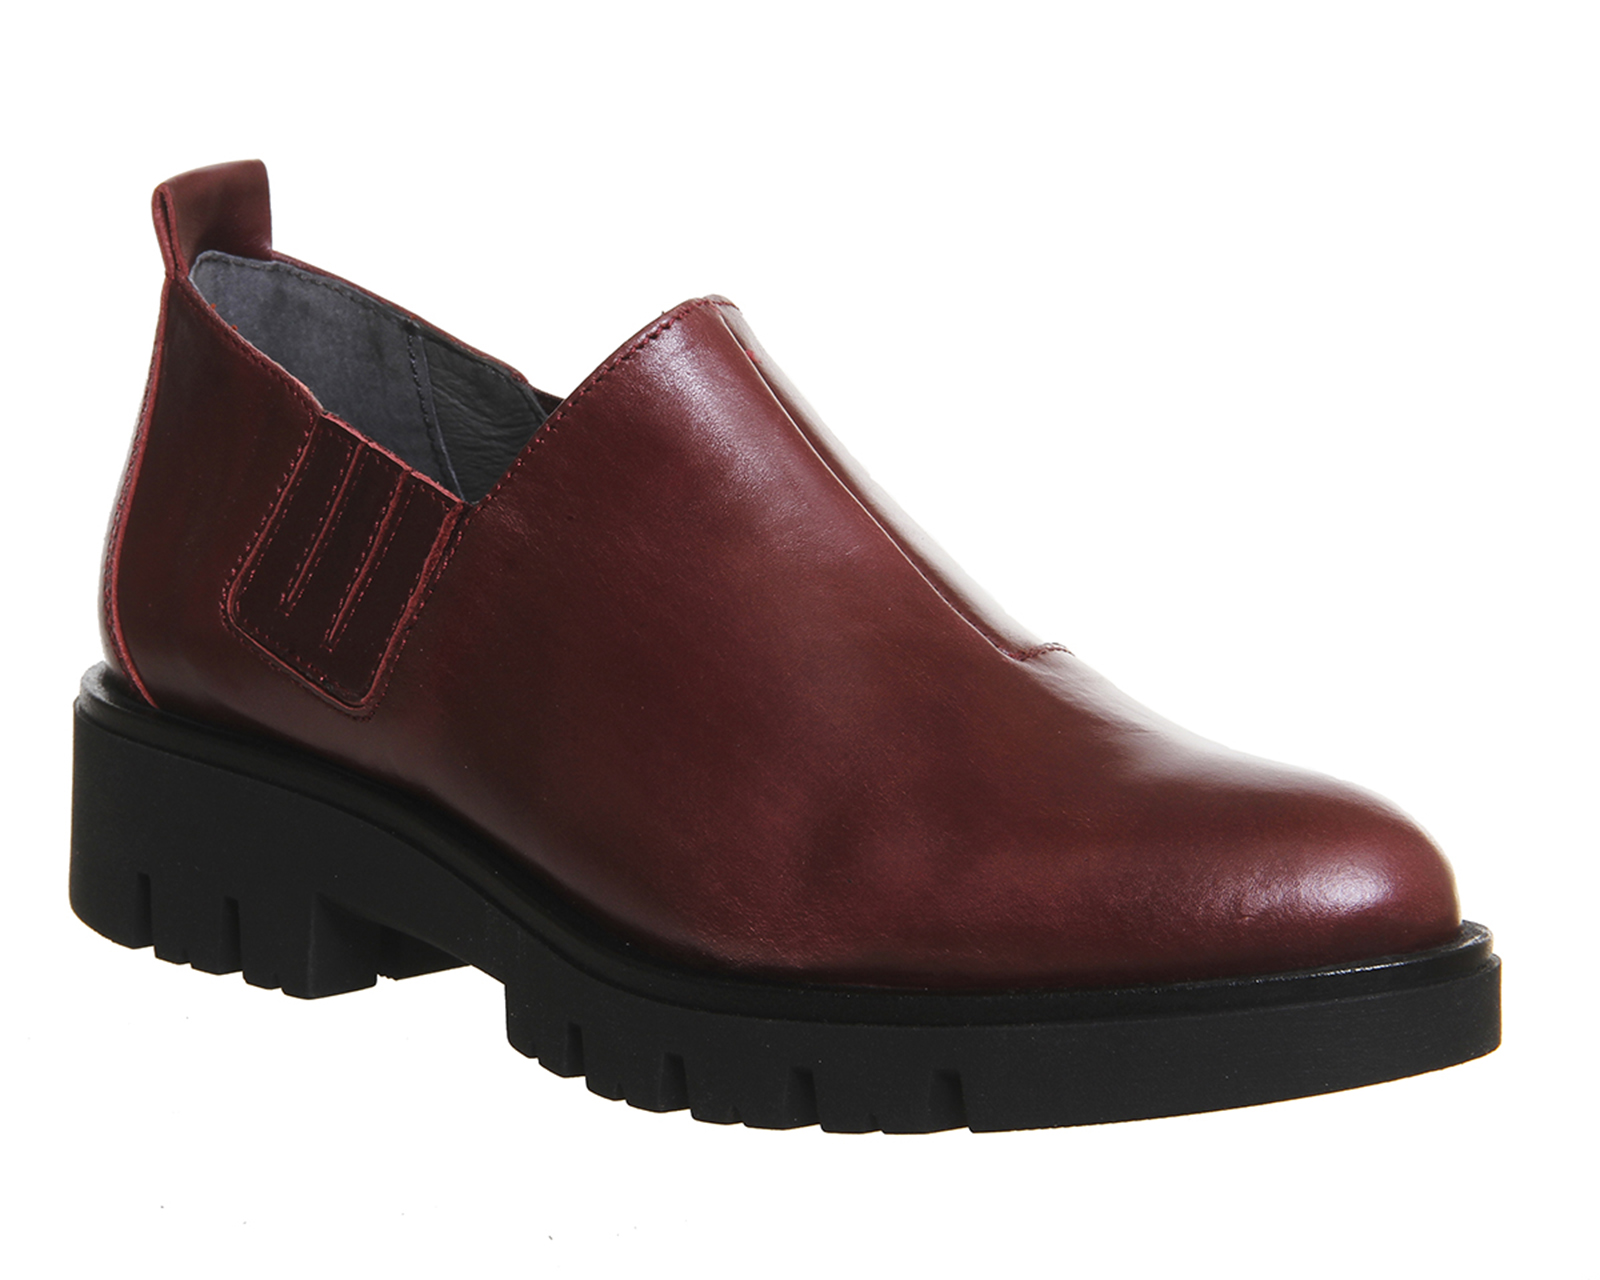 Gaimo for OFFICEMia Slip On ShoeWine Leather